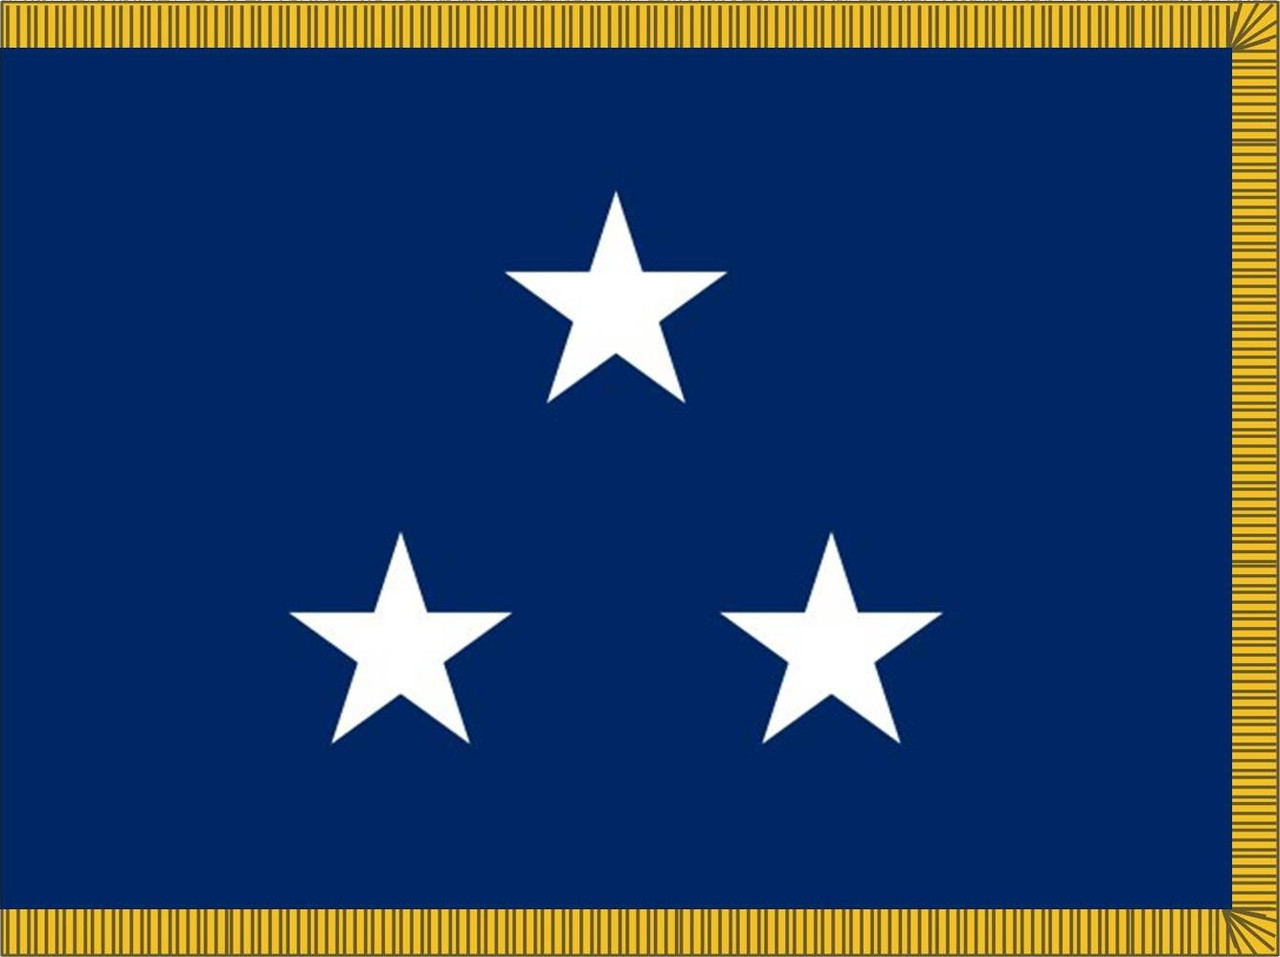 Navy Vice Admiral Flag, 3 Star Nylon Applique with Pole Hem and Gold Fringe, Size 3' X 5', 3103054ADM